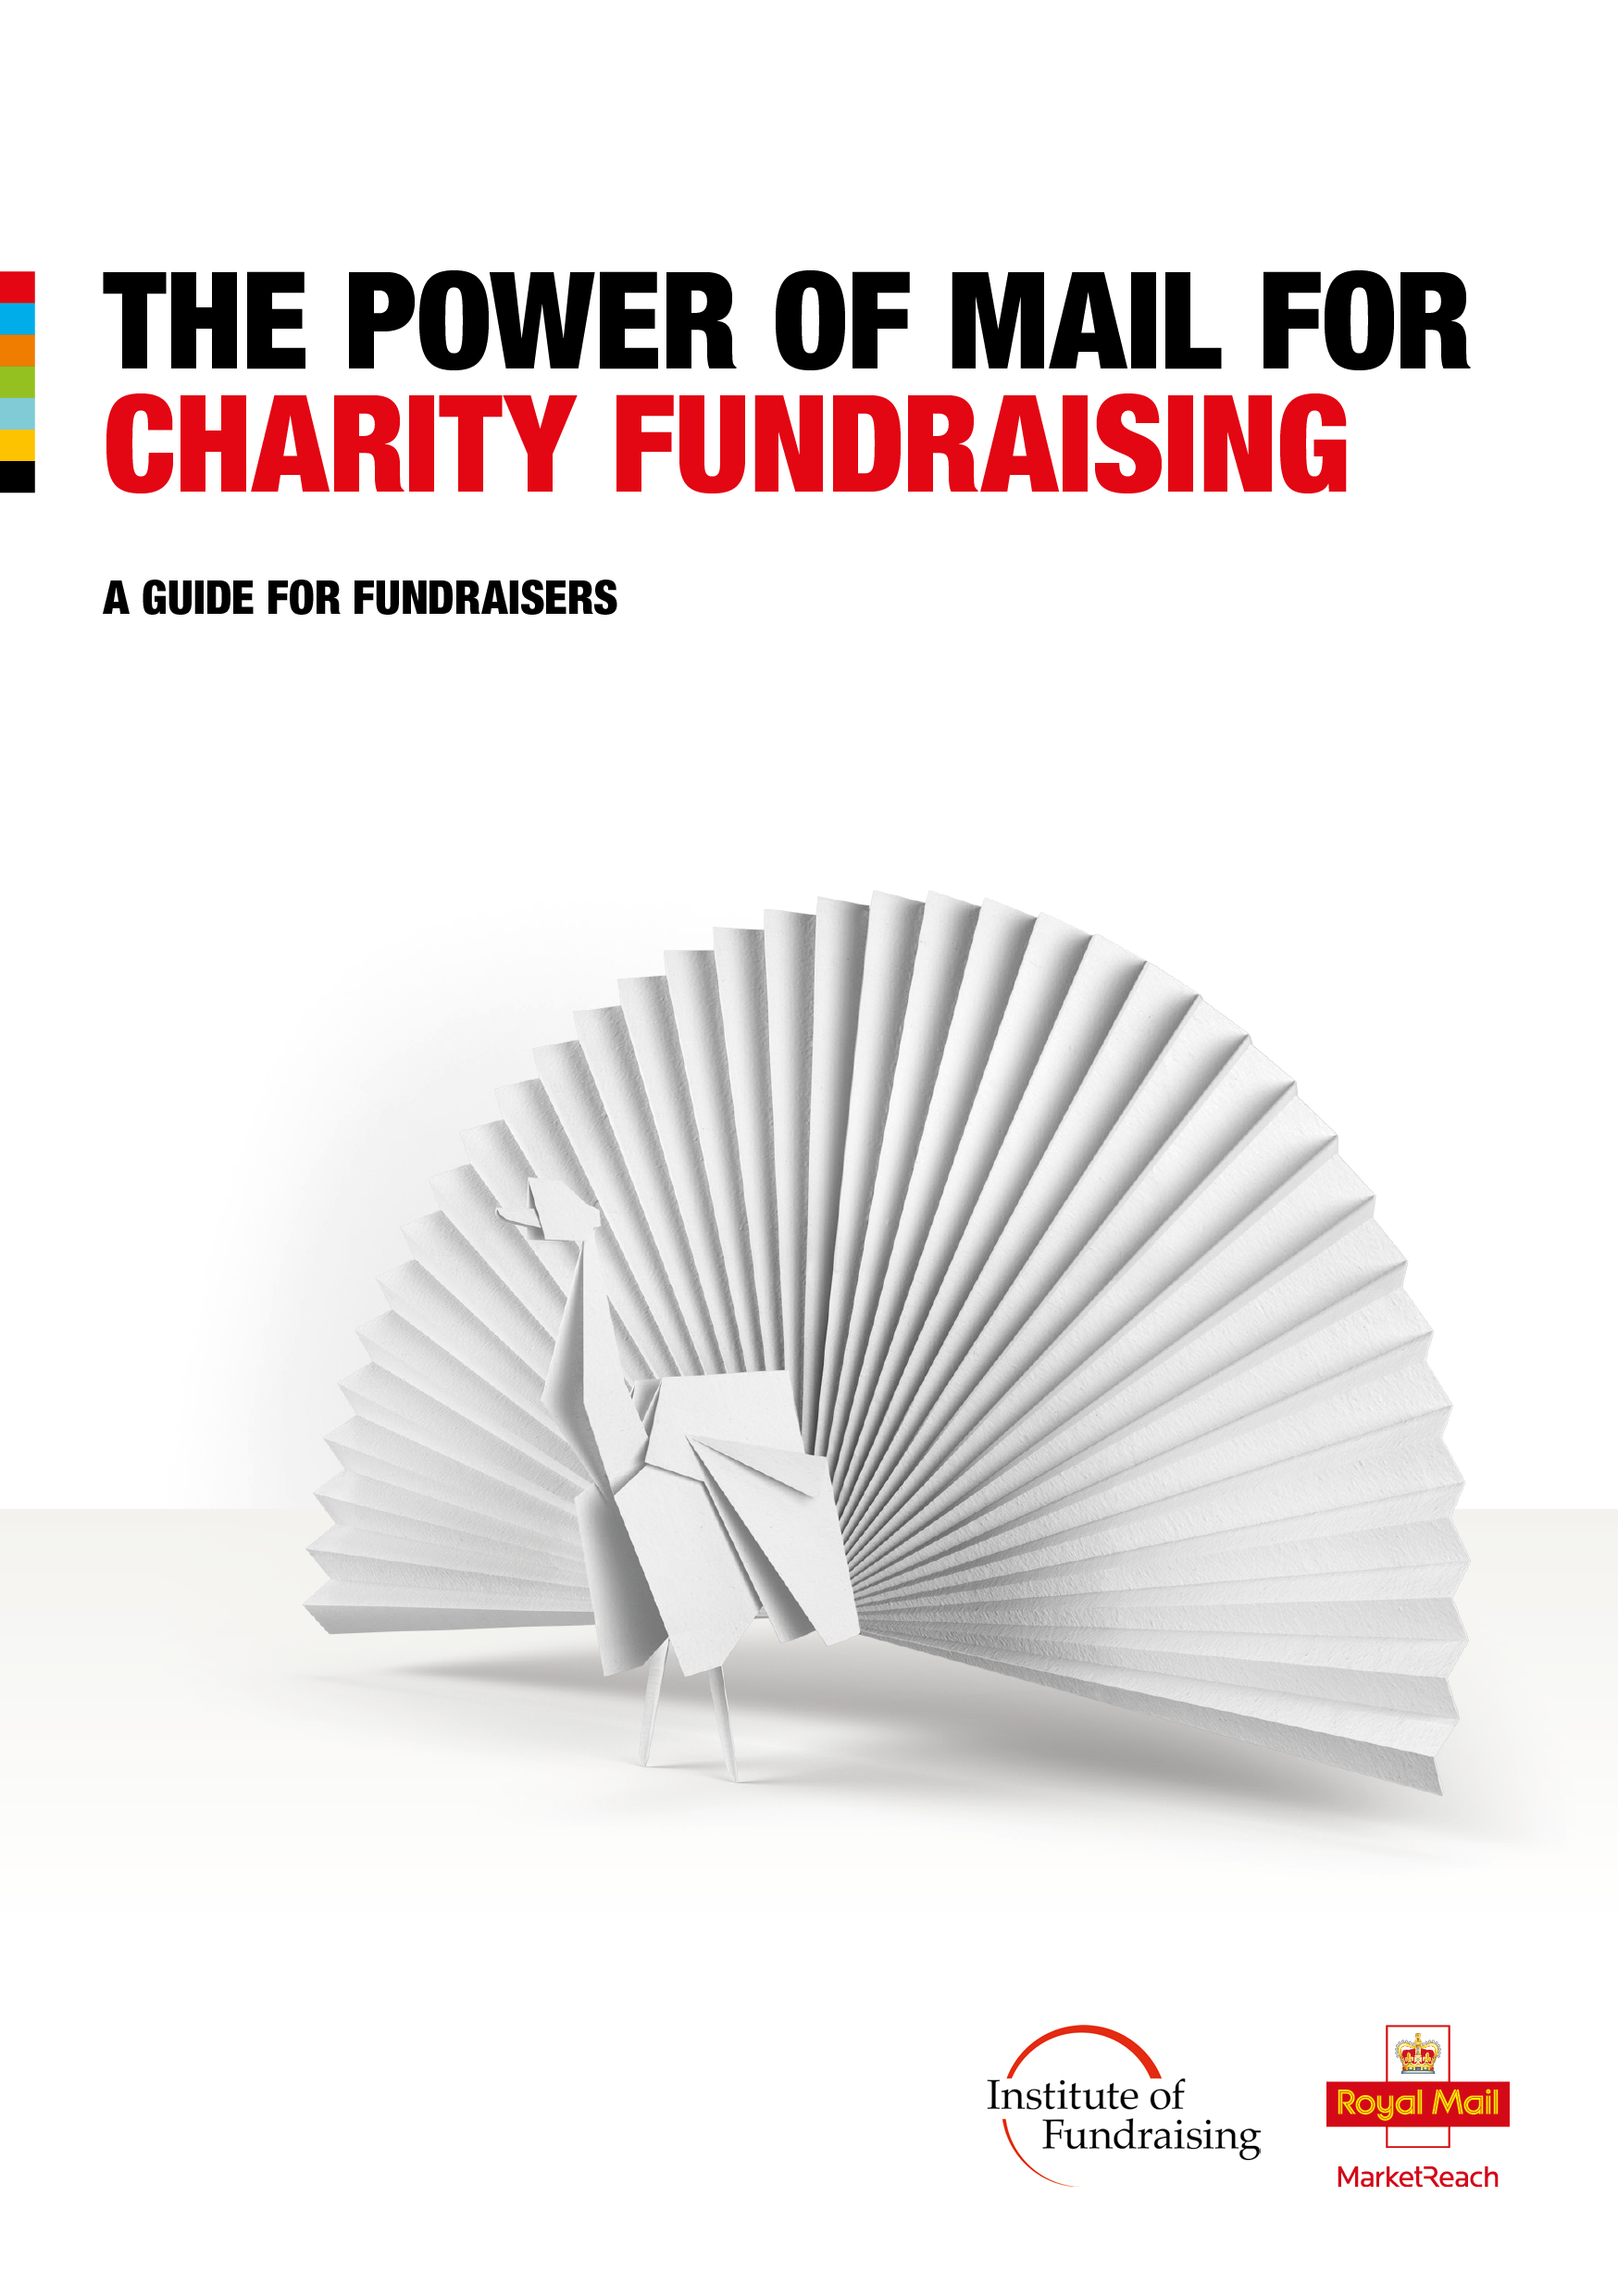 The power of mail for charity fundraising